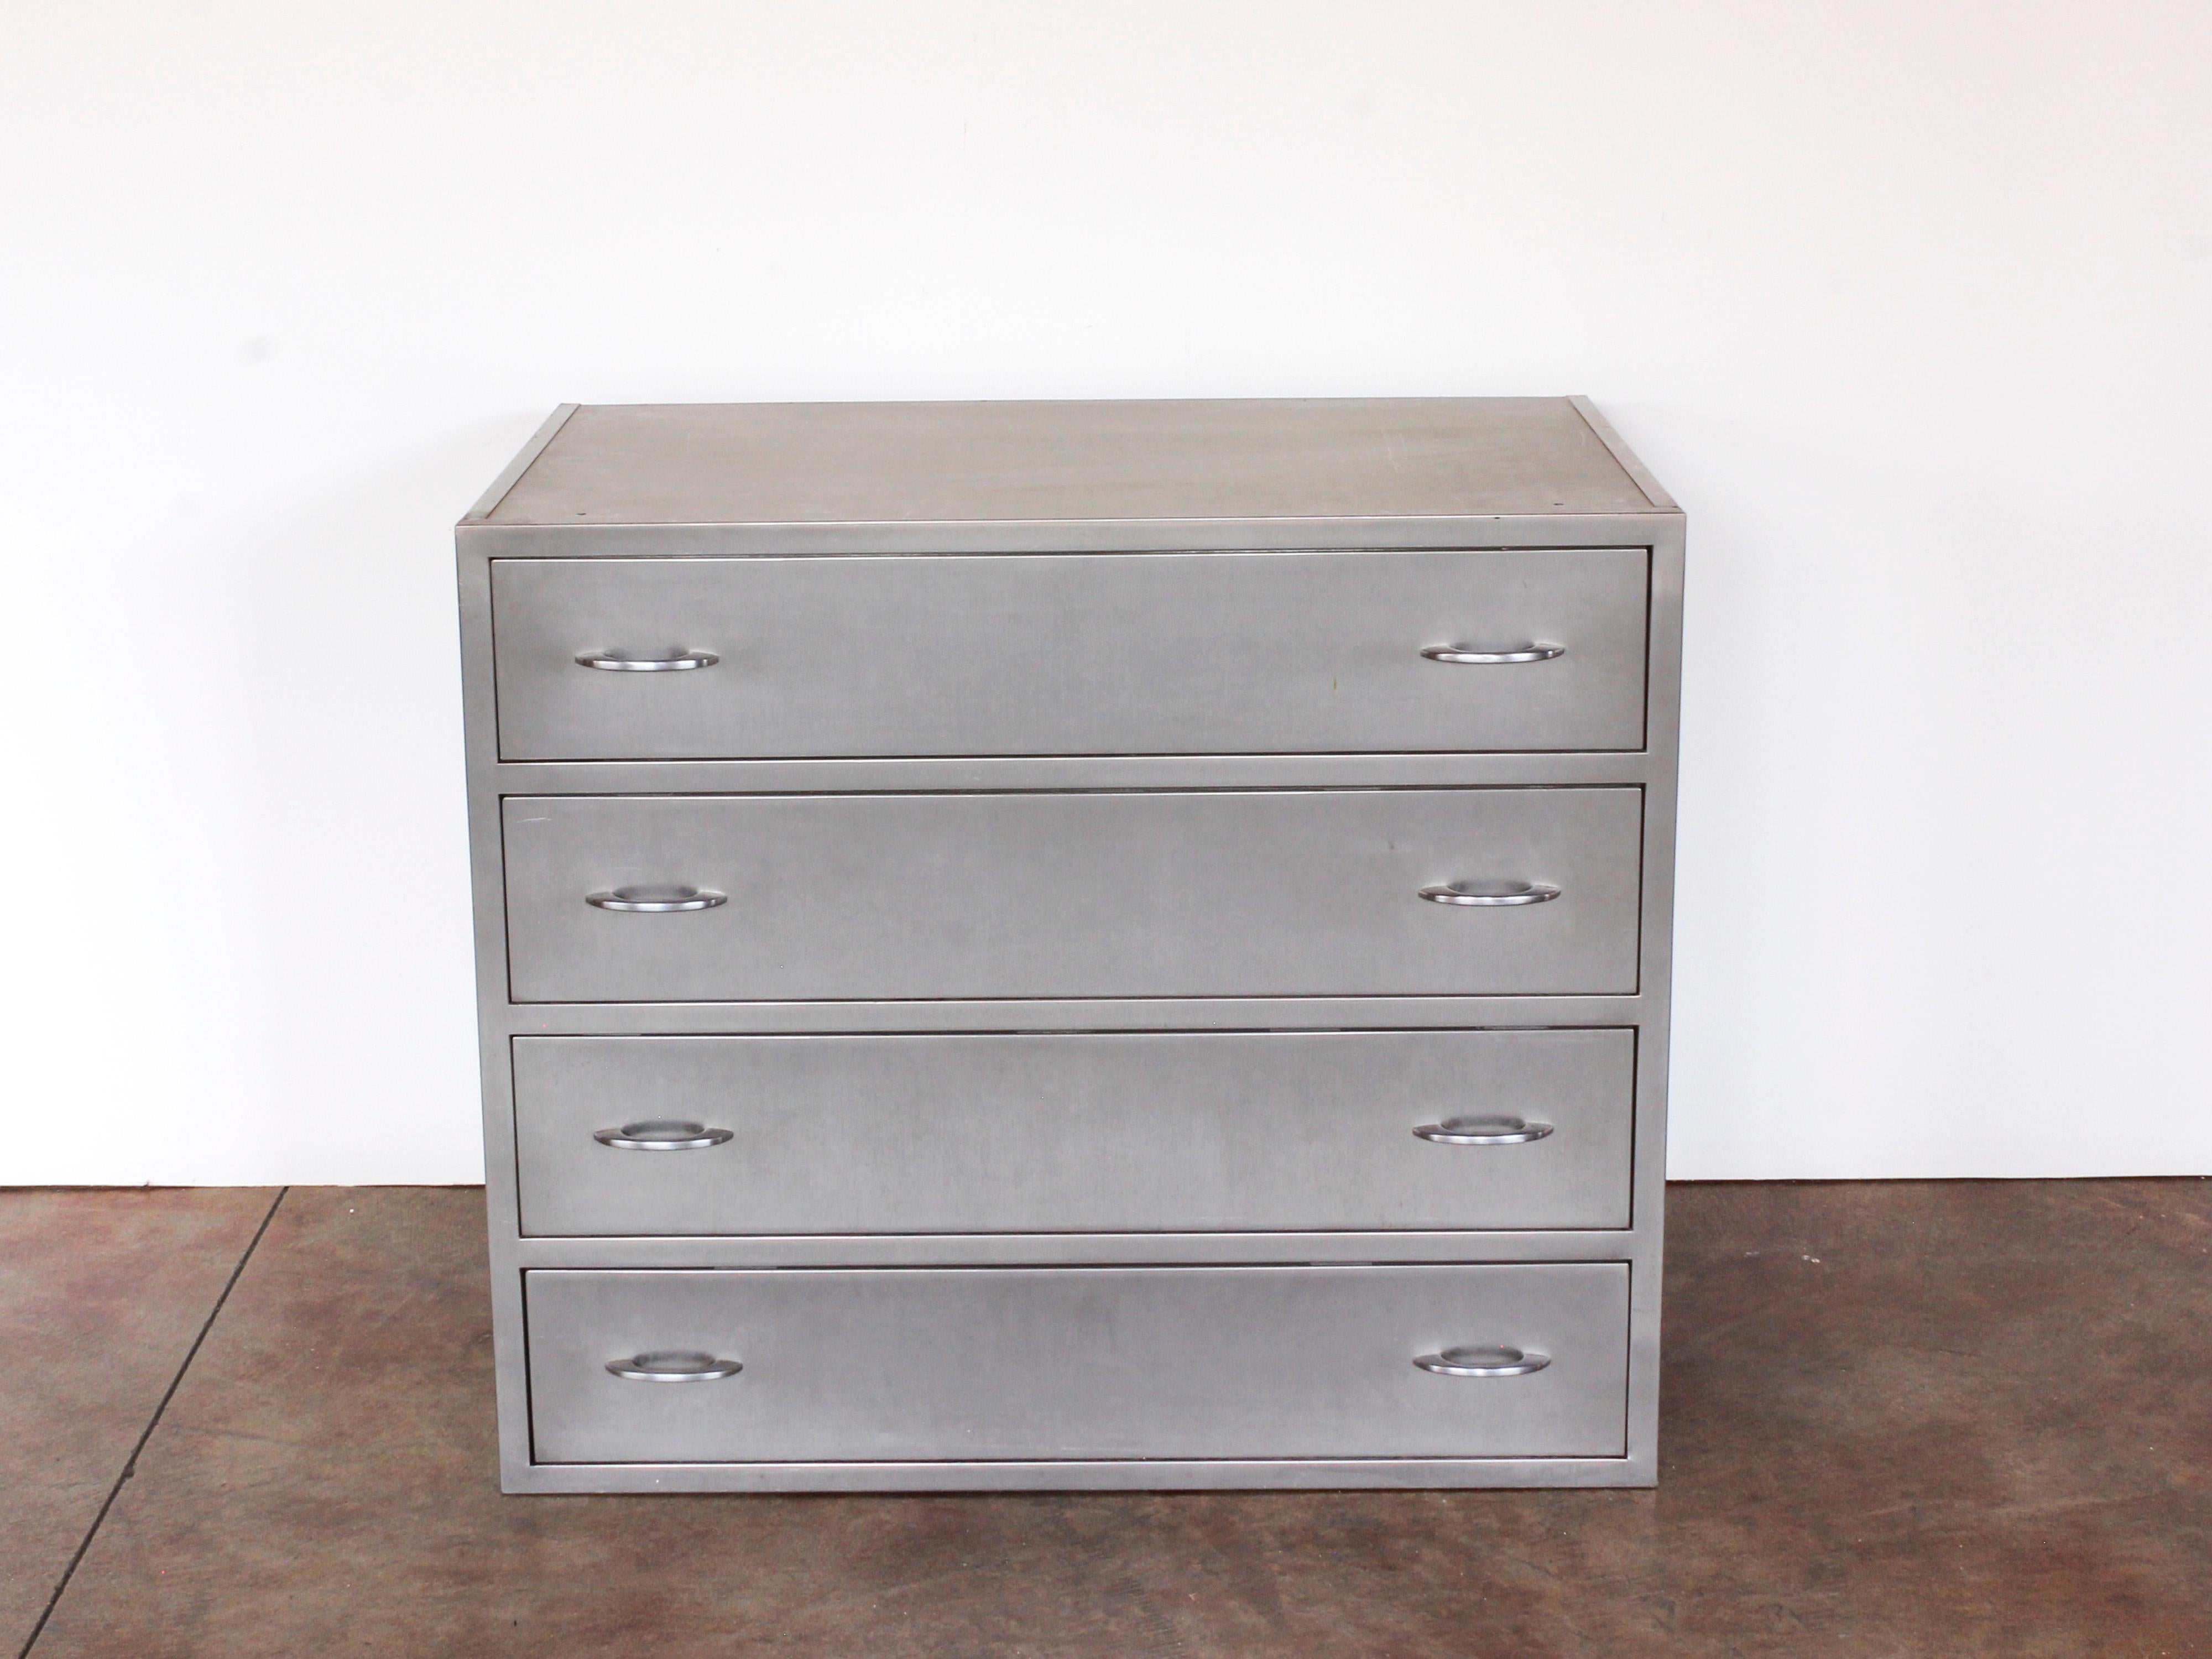 American Industrial Stainless Steel Chest With 4 Drawers, C. 1940s For Sale 1